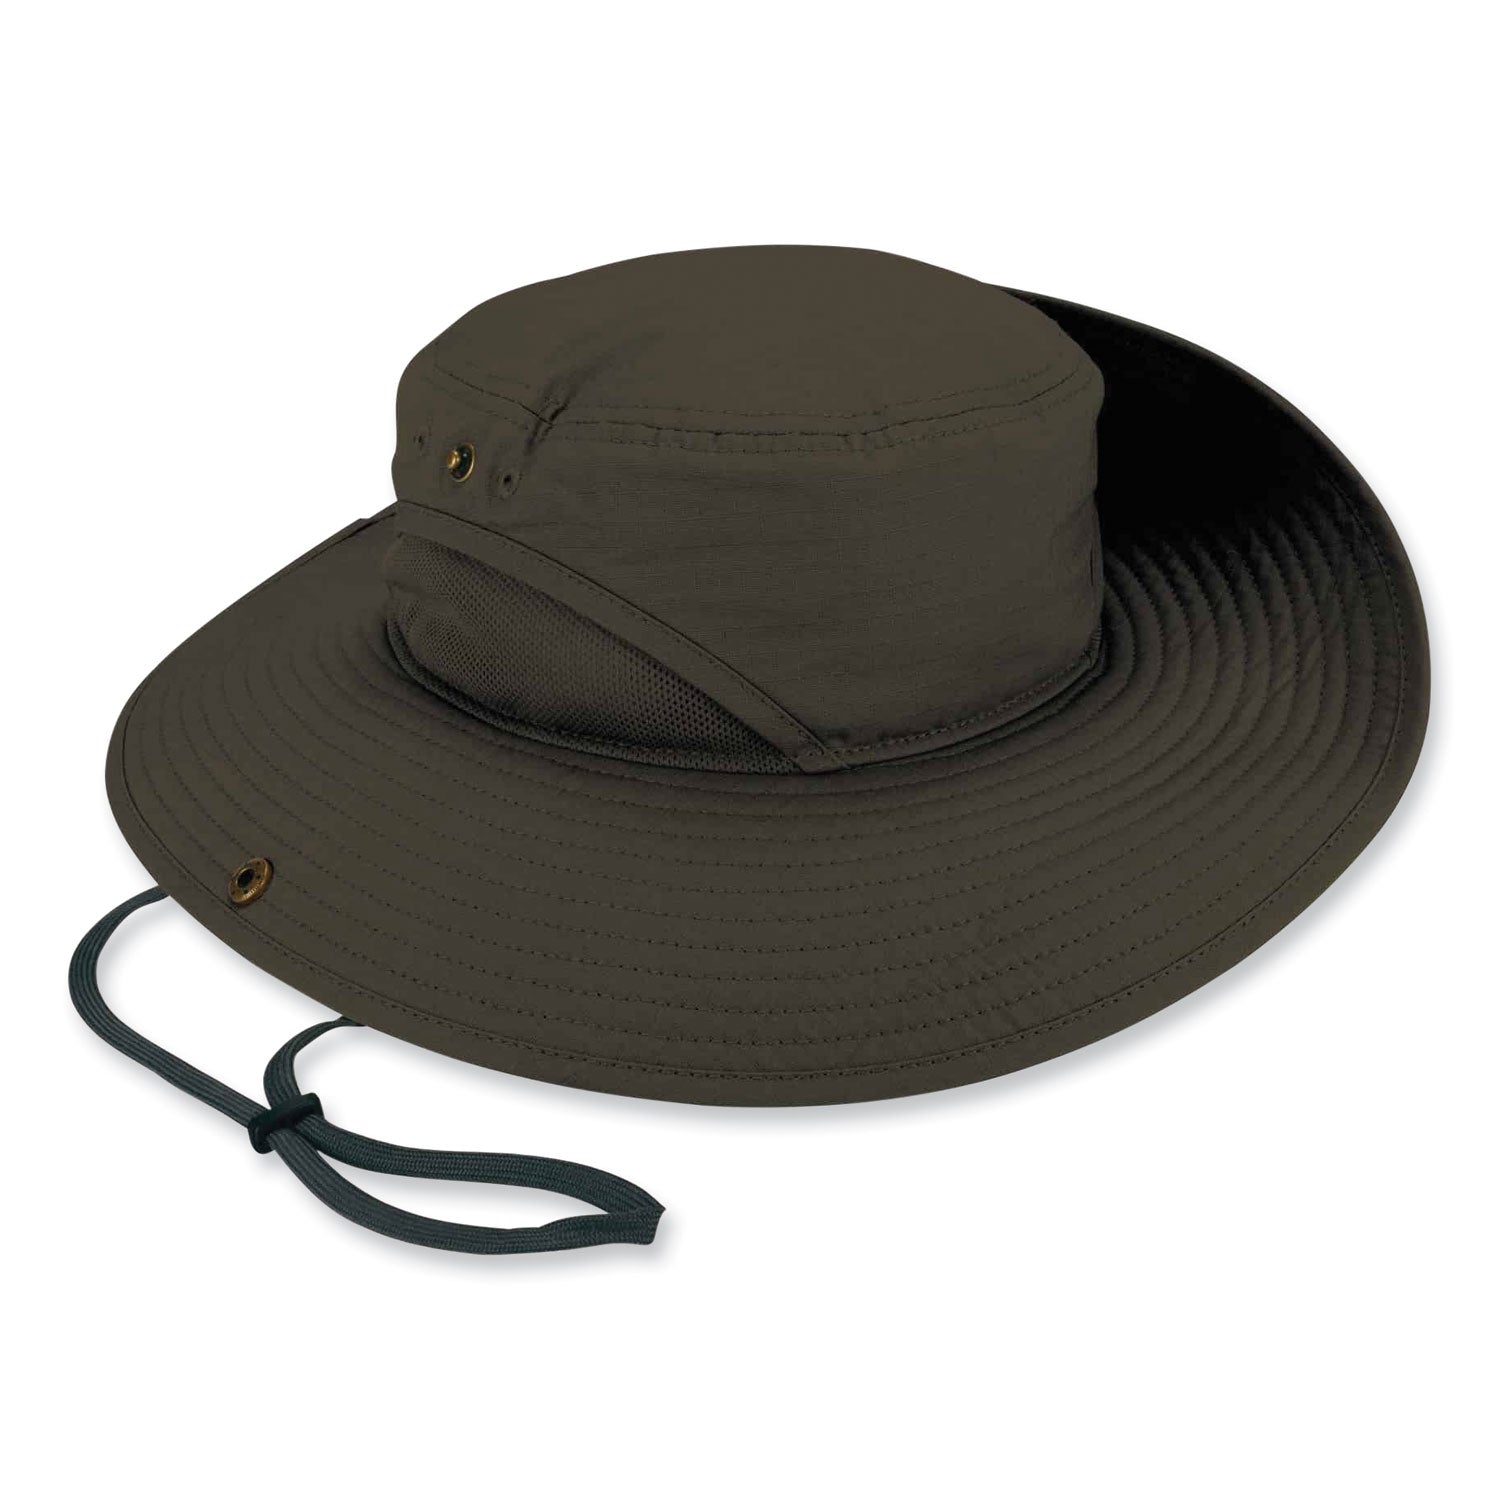 chill-its-8936-lightweight-mesh-paneling-ranger-hat-small-medium-olive-ships-in-1-3-business-days_ego12602 - 1